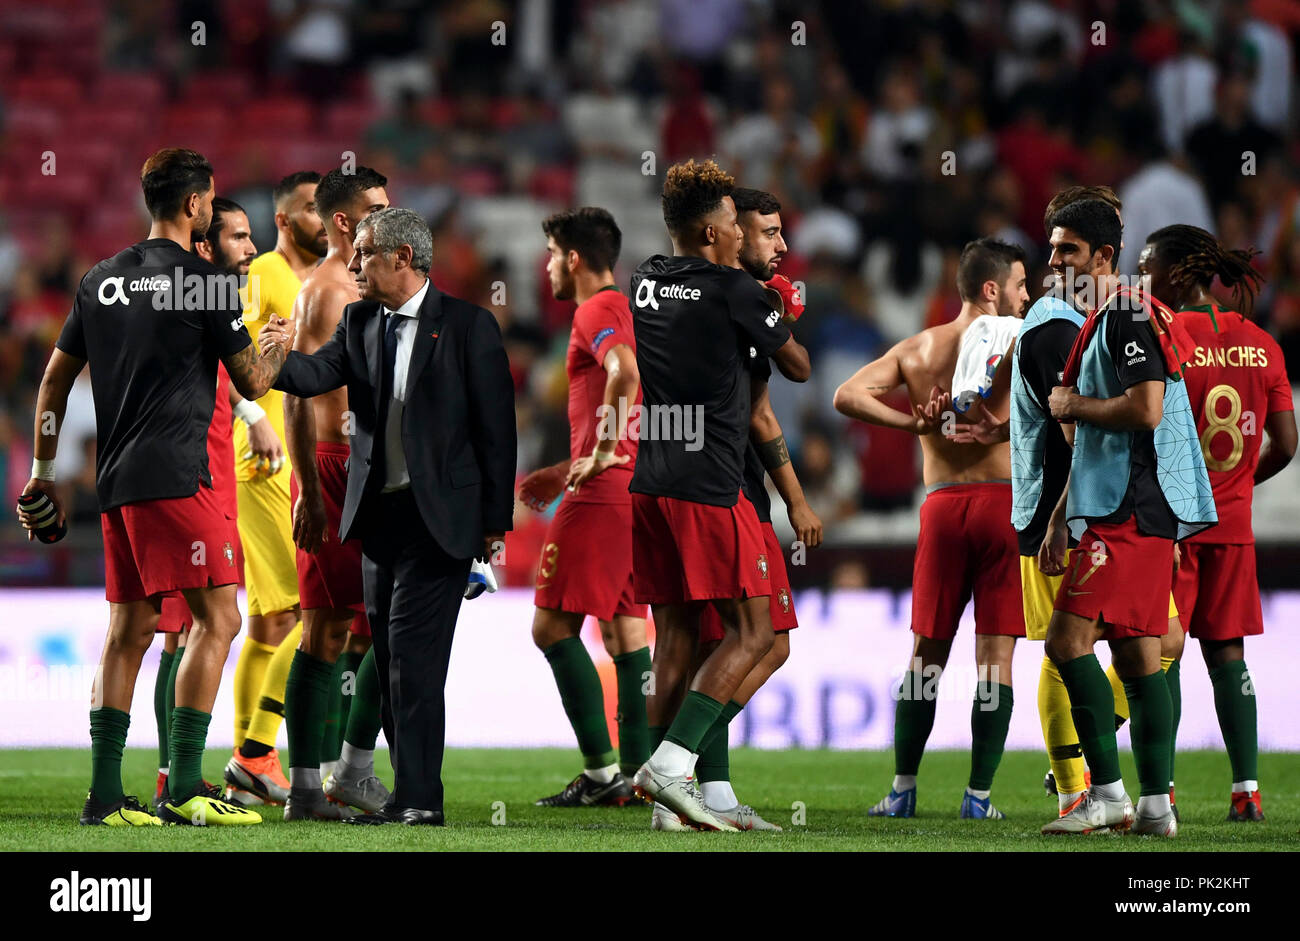 Lisbon, Portugal. 10th Sep, 2018. Fernando Santos (2nd L), head coach of Portugal celebrates with his players after the UEFA Nations League soccer match between Portugal and Italy at Luz Stadium in Lisbon, Portugal, on Sept. 10, 2018. Portugal won 1-0. Credit: Zhang Liyun/Xinhua/Alamy Live News Stock Photo